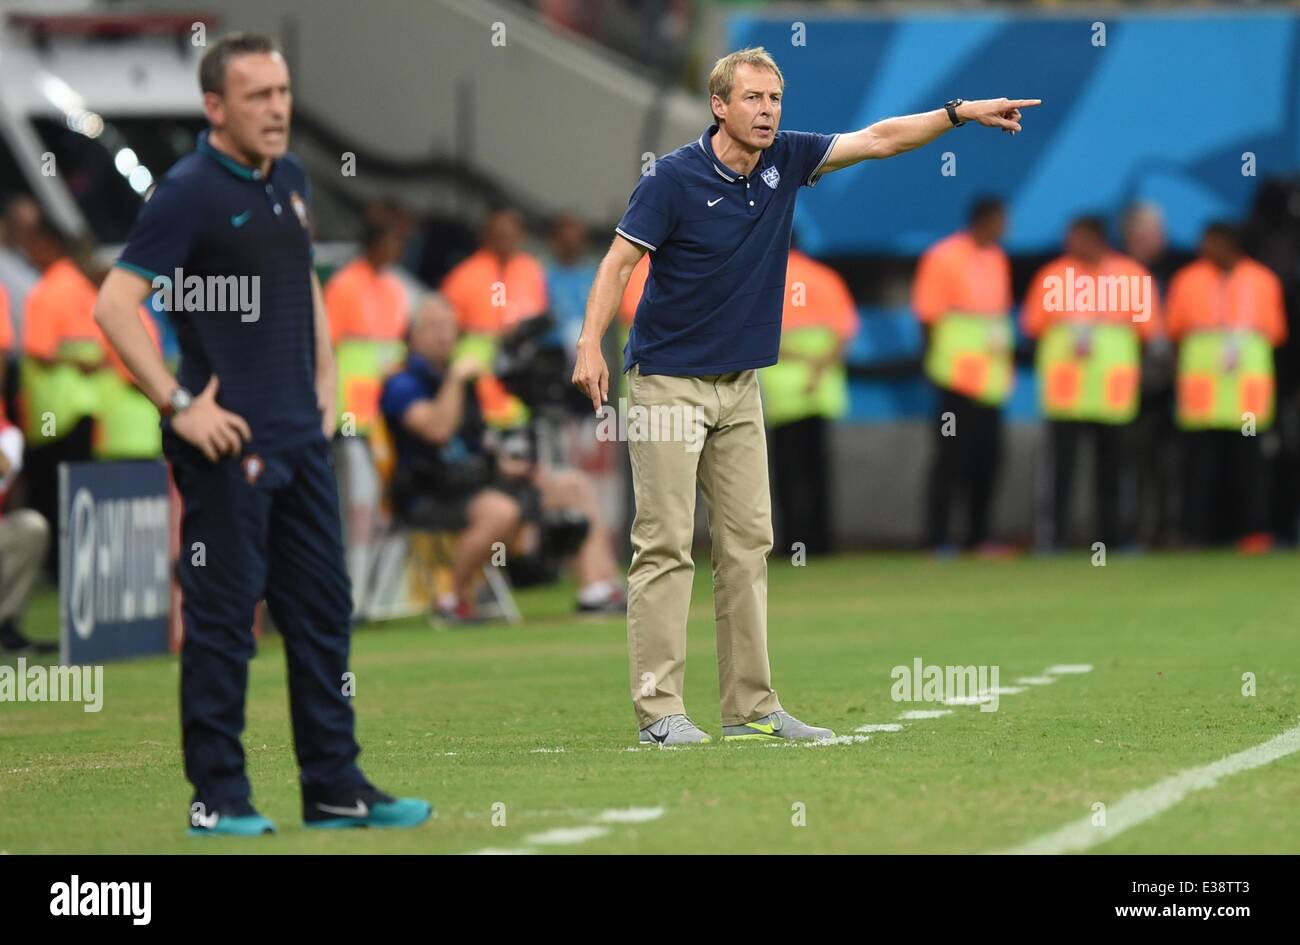 Manaus, Brazil. 22nd June, 2014. Head coach Paulo Bento (L) of Portugal reacts next to head coach Juergen Klinsmann (R) of USA during the FIFA World Cup 2014 group G preliminary round match between the USA and Portugal at the Arena Amazonia Stadium in Manaus, Brazil, 22 June 2014. Photo: Marius Becker/dpa/Alamy Live News Stock Photo